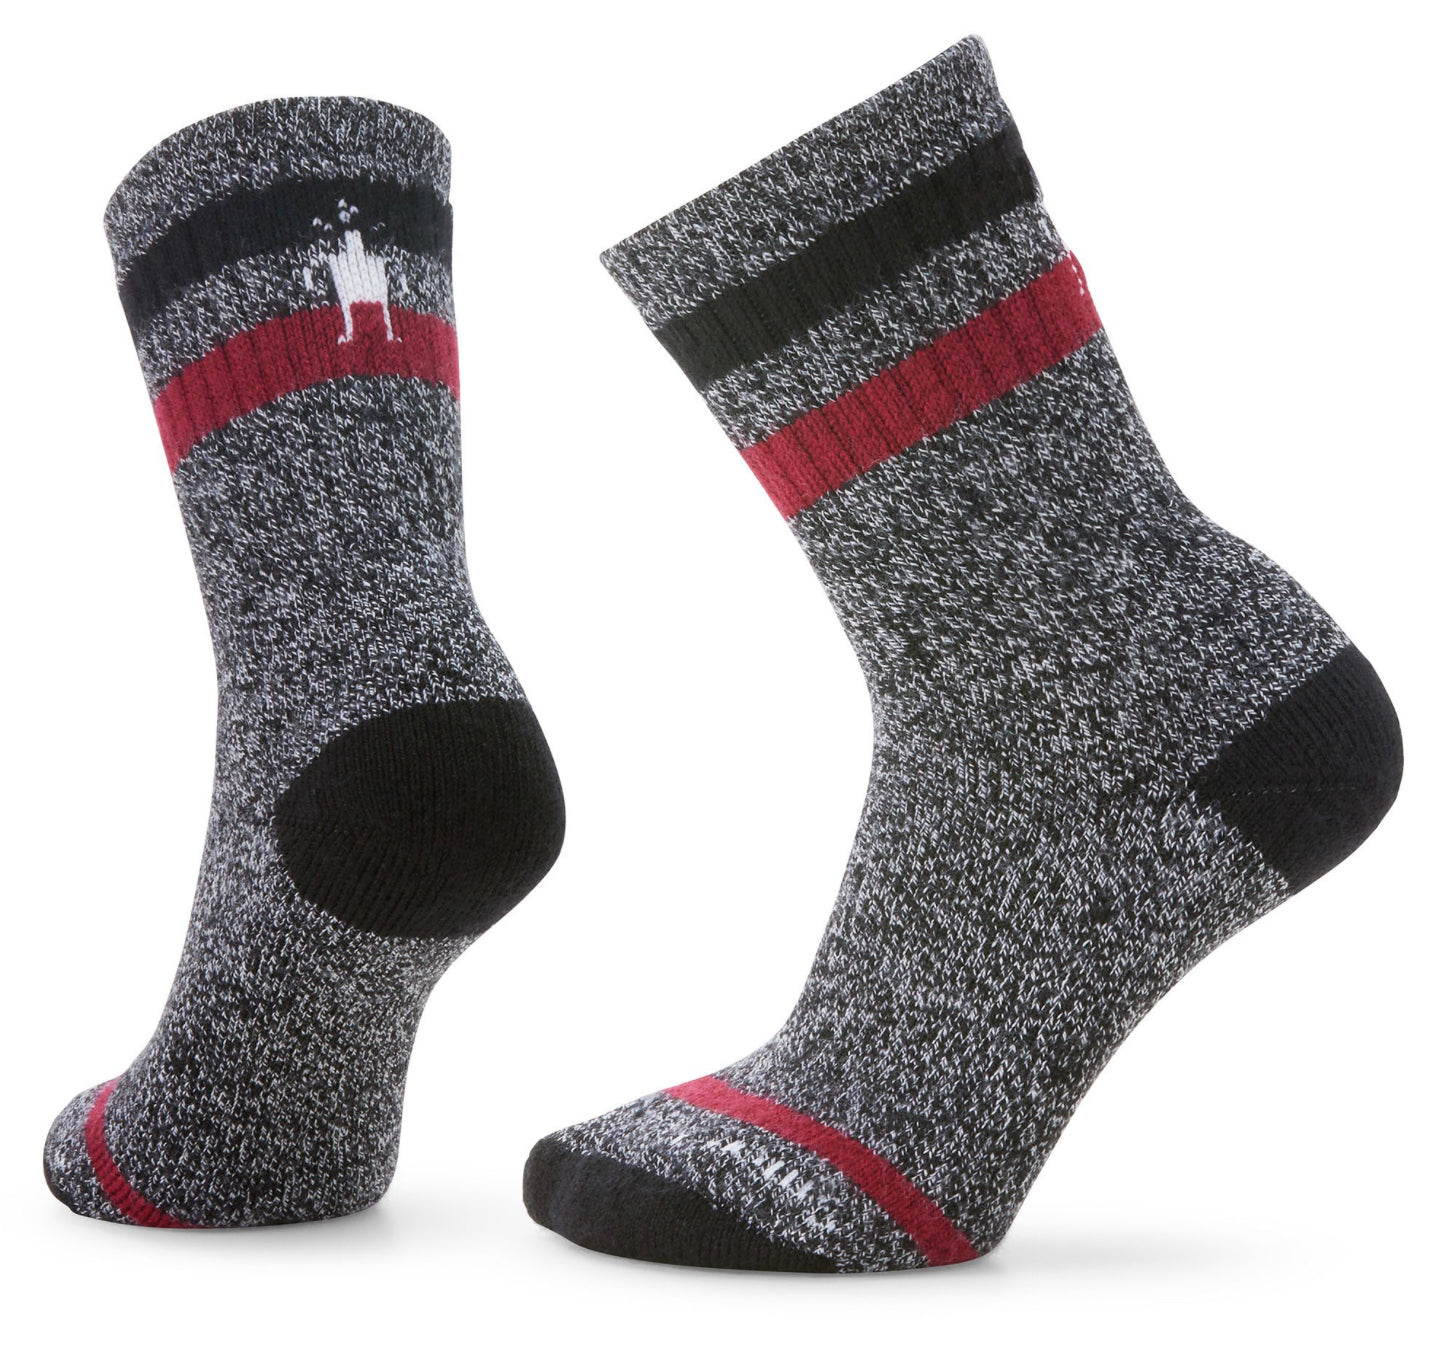 Bring the feeling of your favourite Merino wool sweater to your sock drawer with the Women's Everyday Heritage Crew Socks.